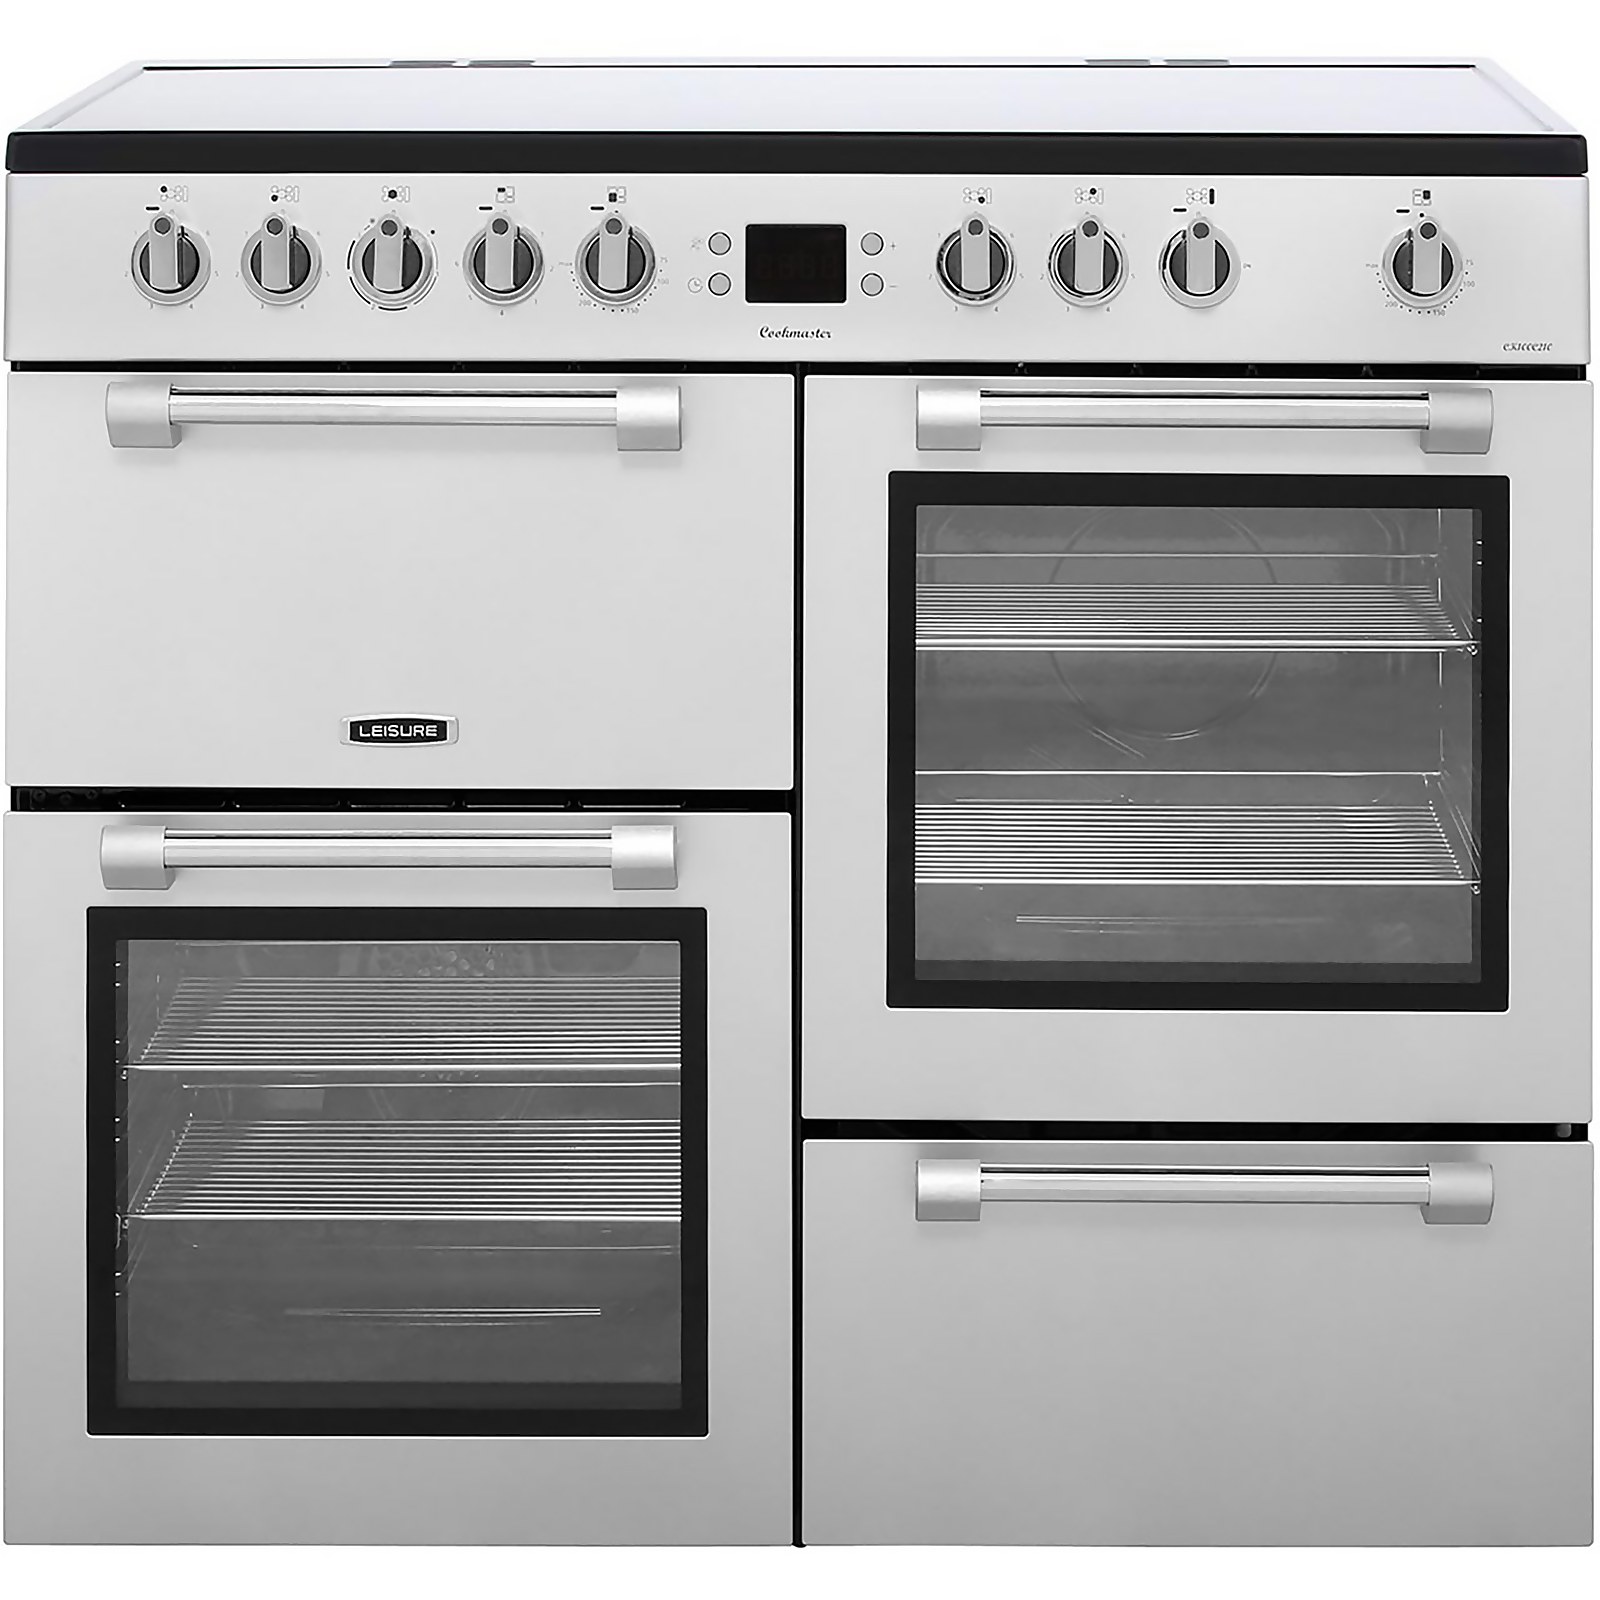 Leisure Cookmaster CK100C210S 100cm Electric Range Cooker with Ceramic Hob - Silver